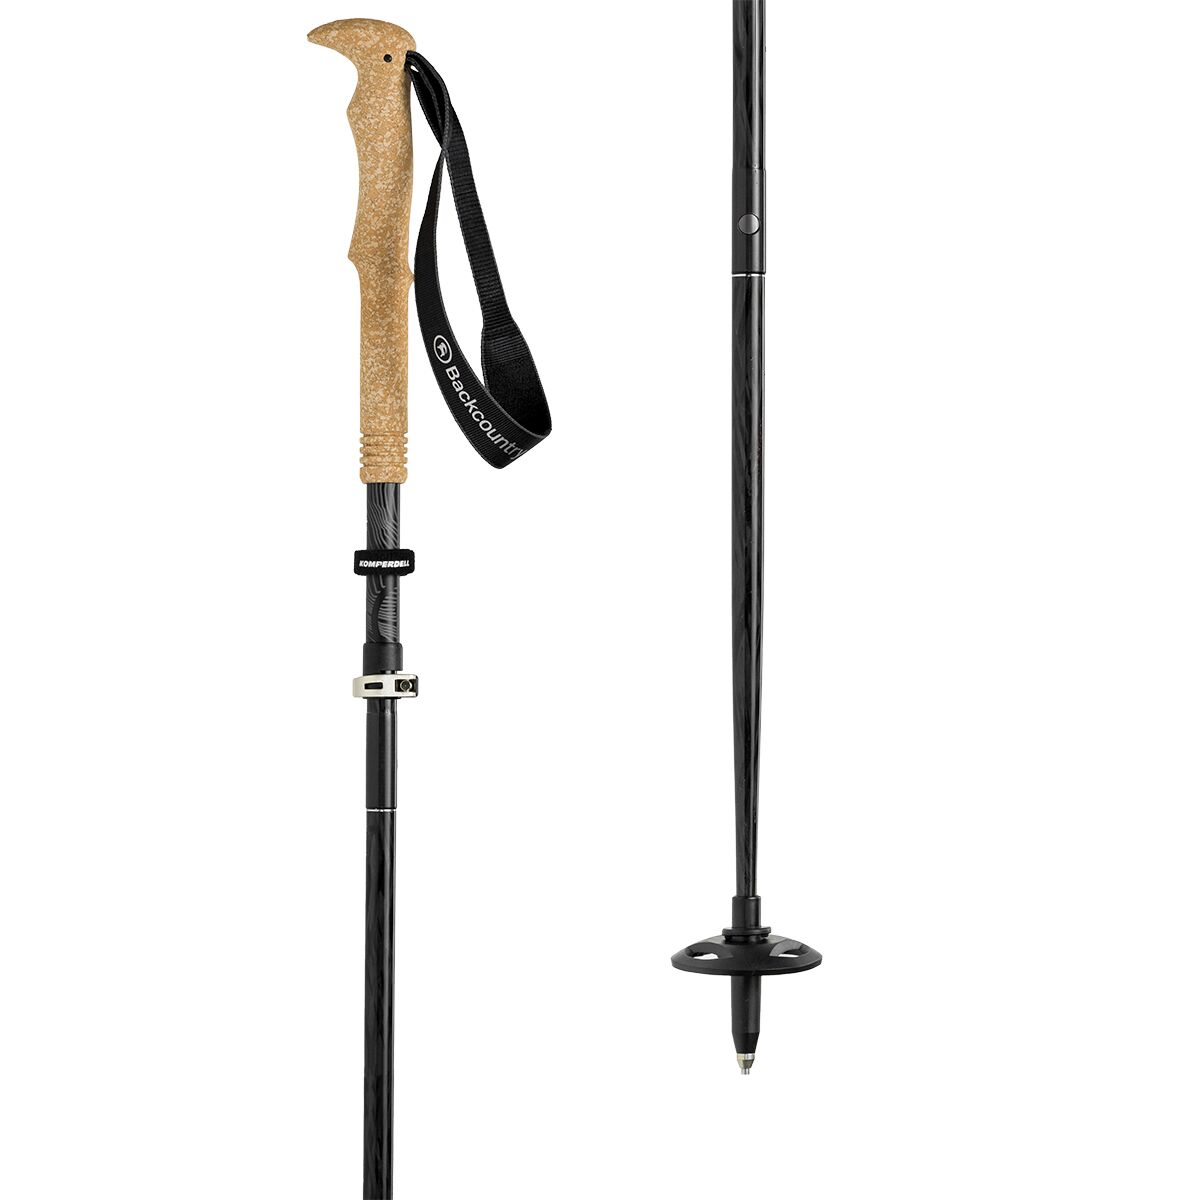 Backcountry Carbon Trekking Pole